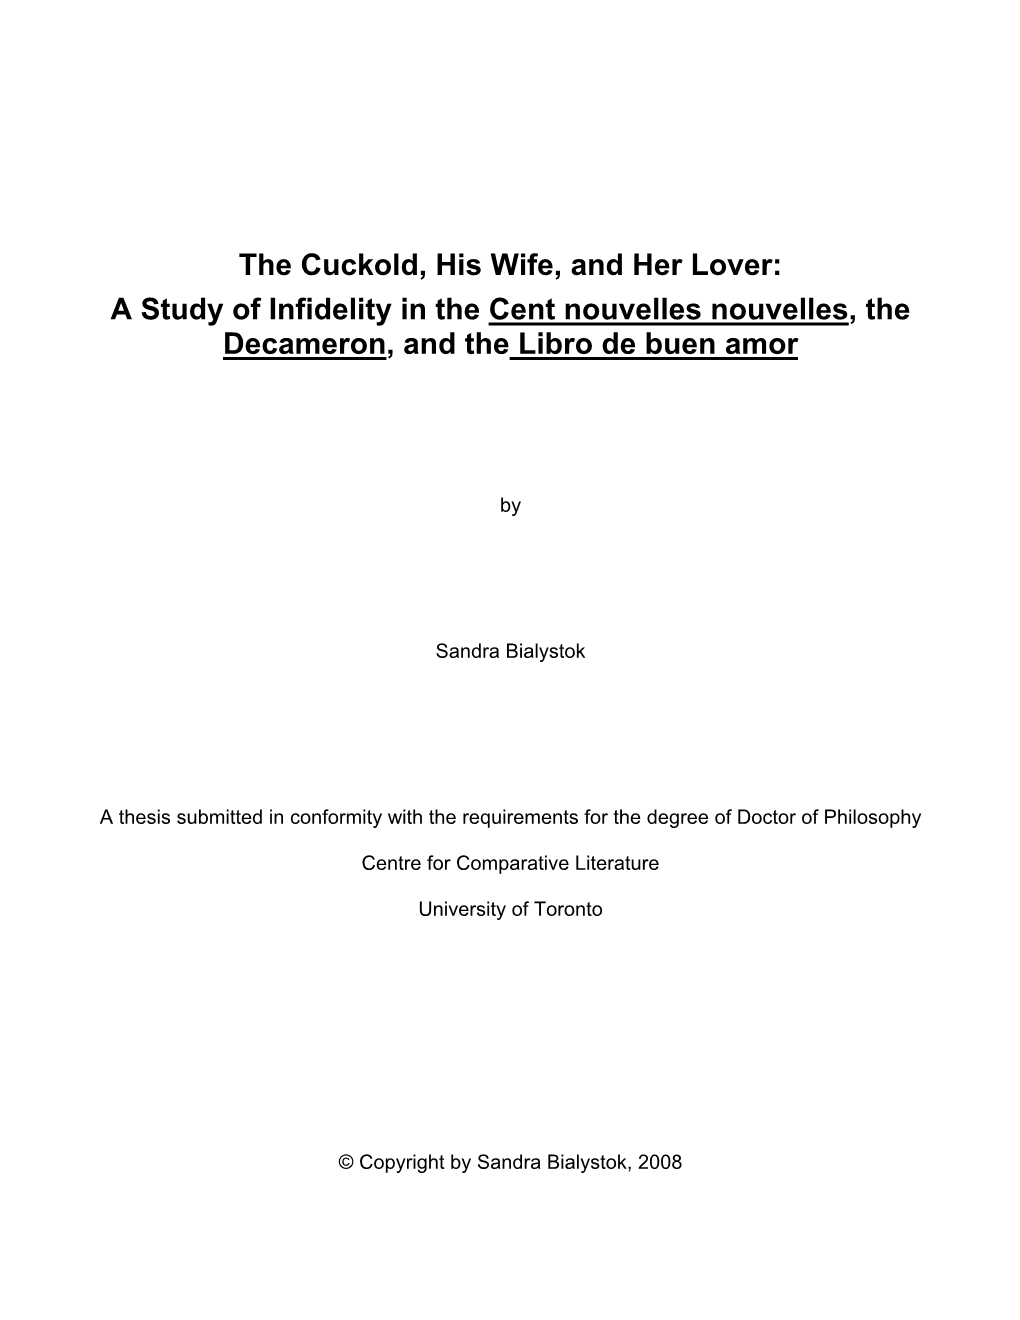 The Cuckold, His Wife, and Her Lover: a Study of Infidelity in the Cent Nouvelles Nouvelles, the Decameron, and the Libro De Buen Amor